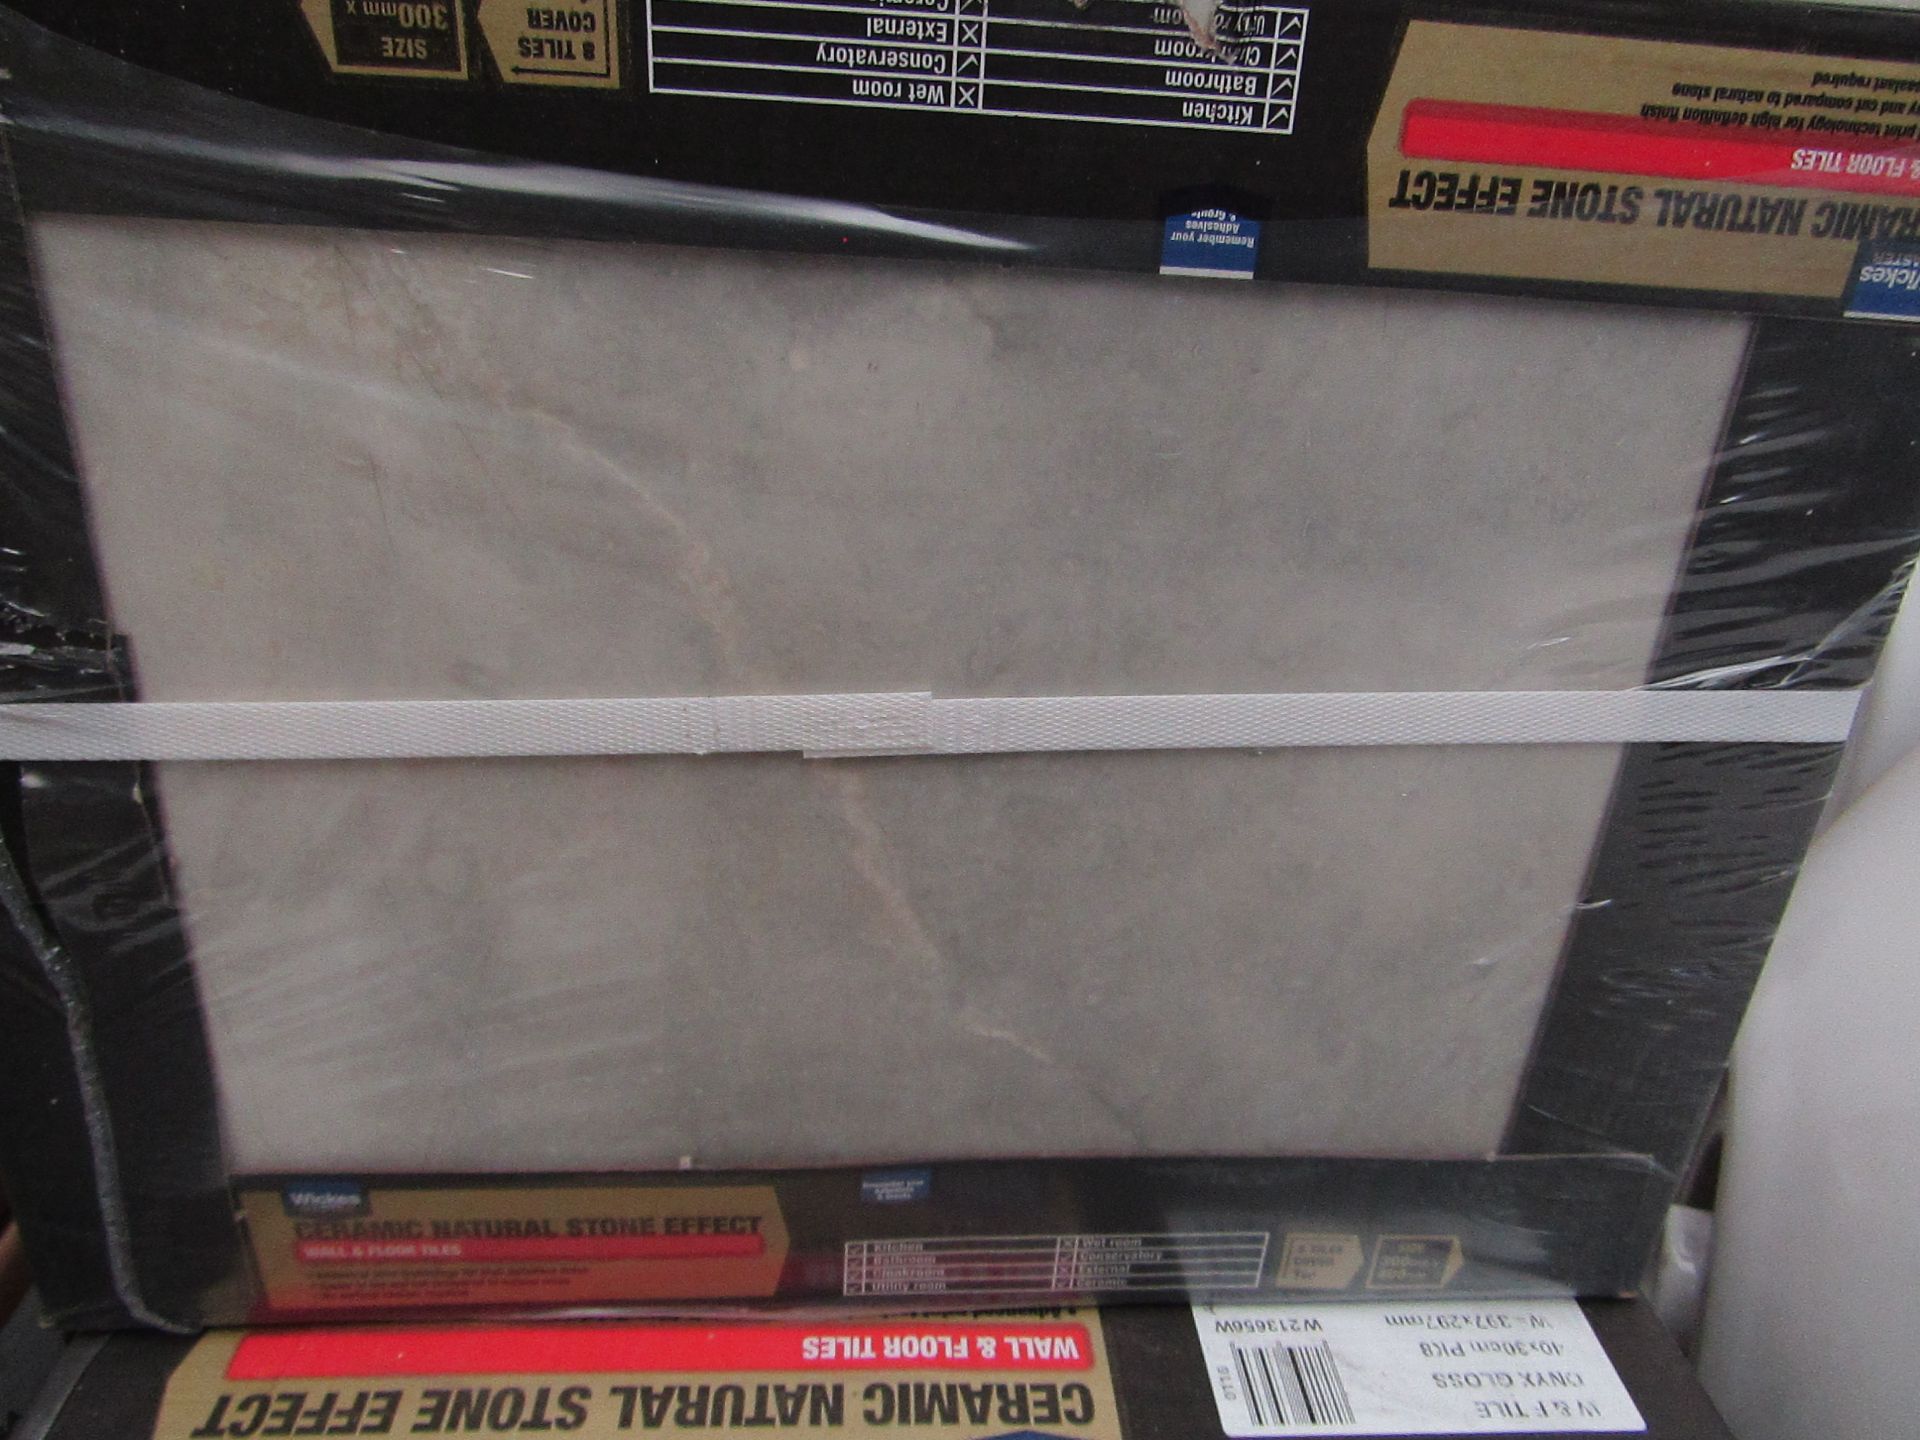 6x Packs of 8, Wickes 400x300 Onyx Gloss Wall and Floor tiles, each pack is RRP £16.99 totalling